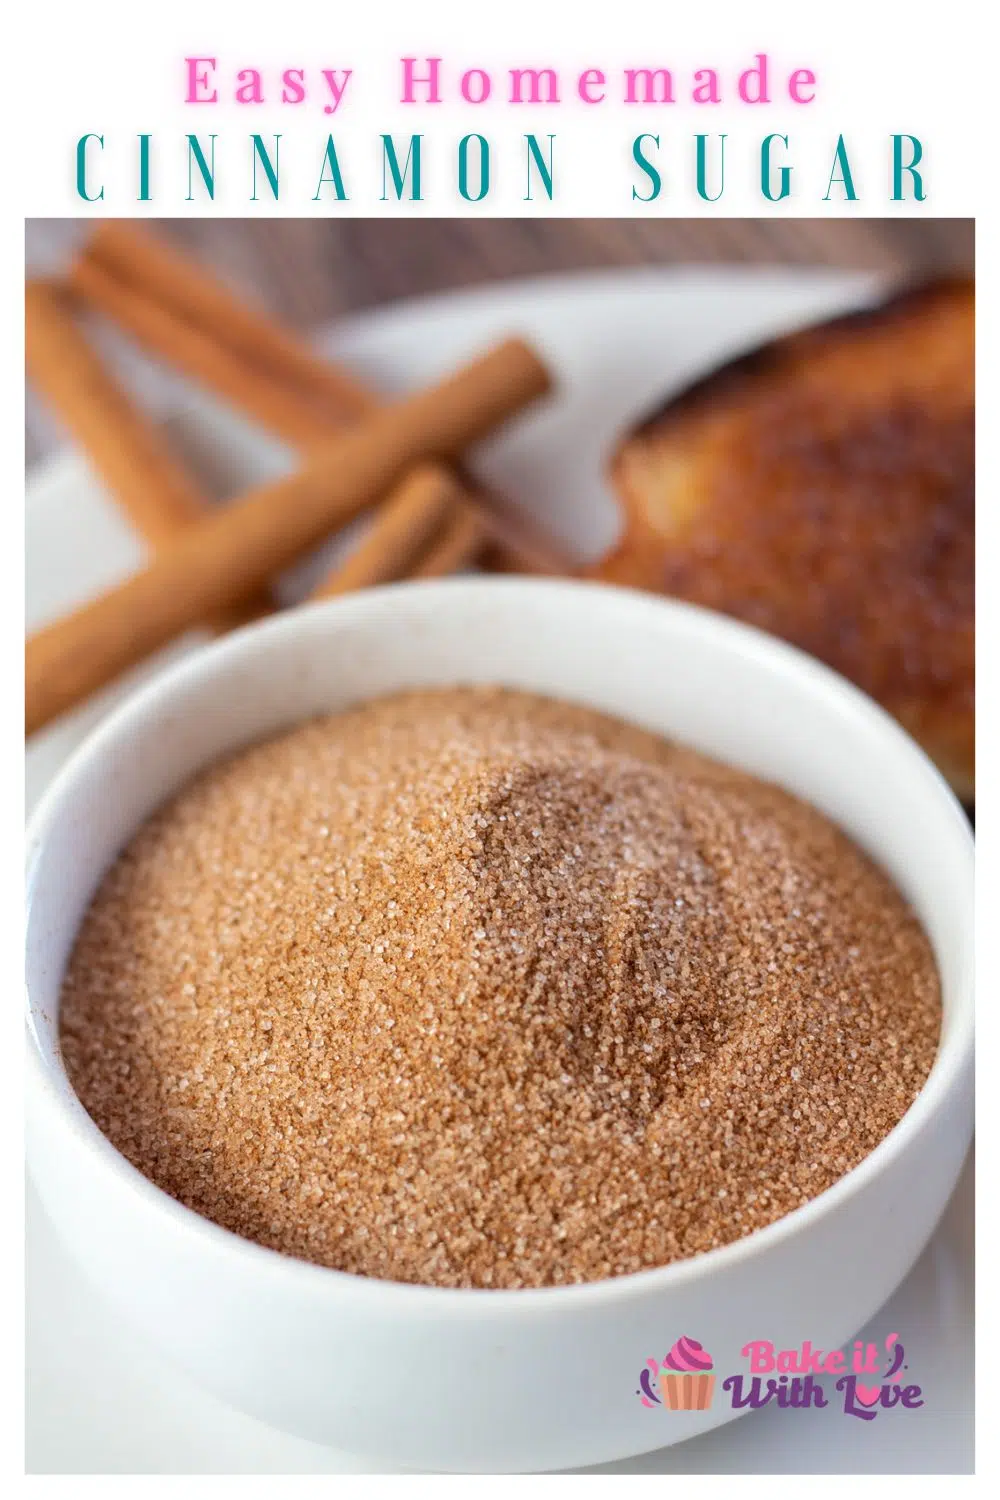 Pin image with text showing cinnamon sugar in a small bowl with toast and cinnamon sticks.